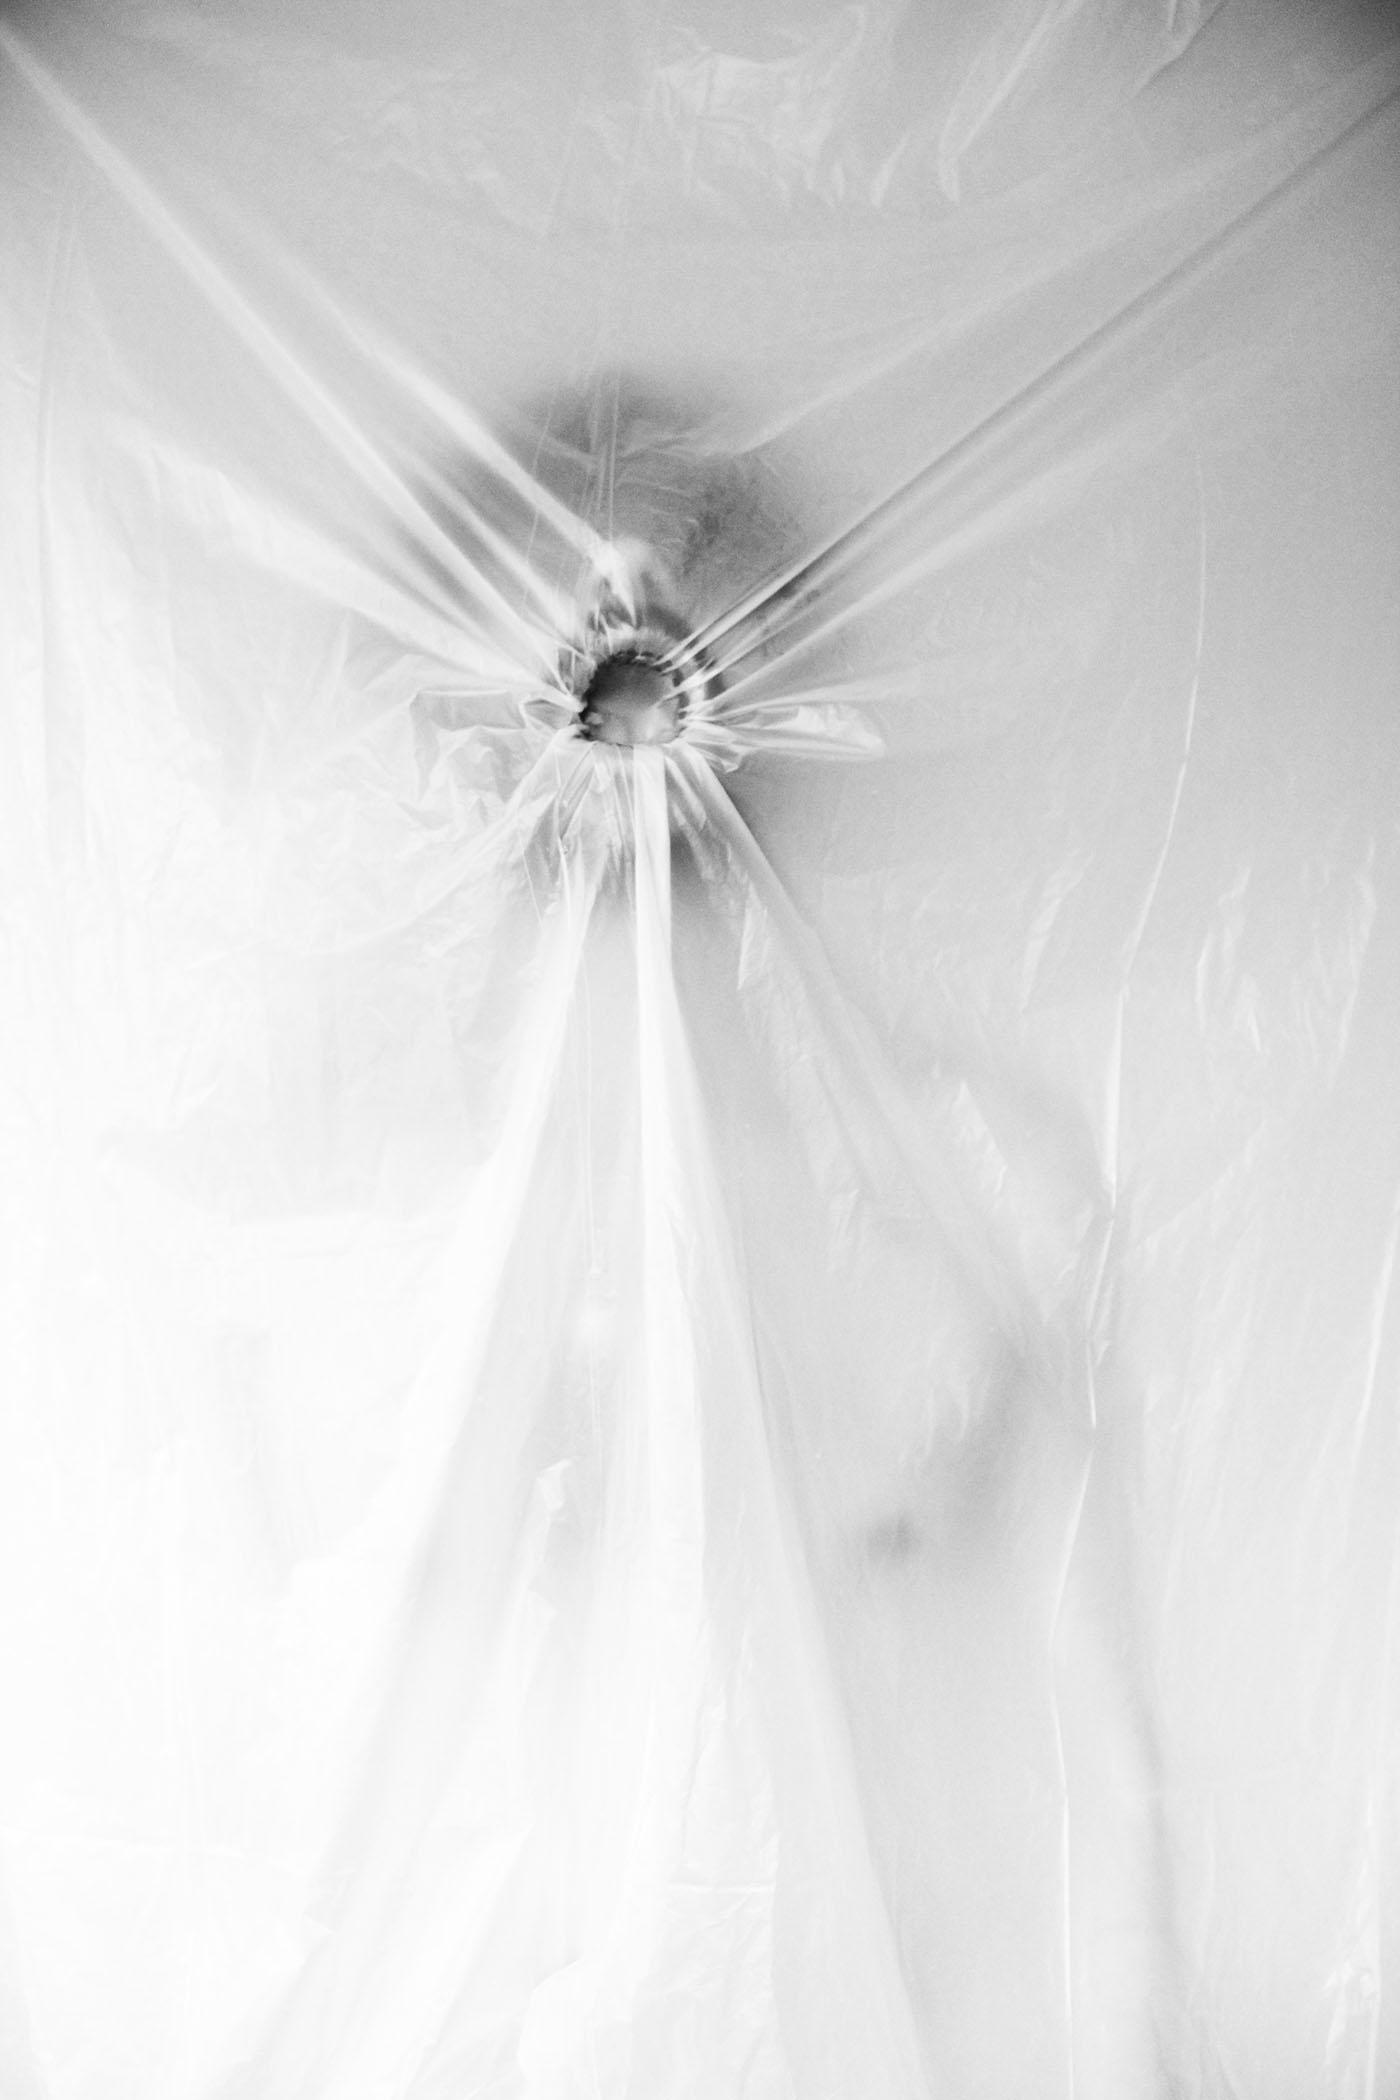 Image of a person breathing in against a transparent sheet